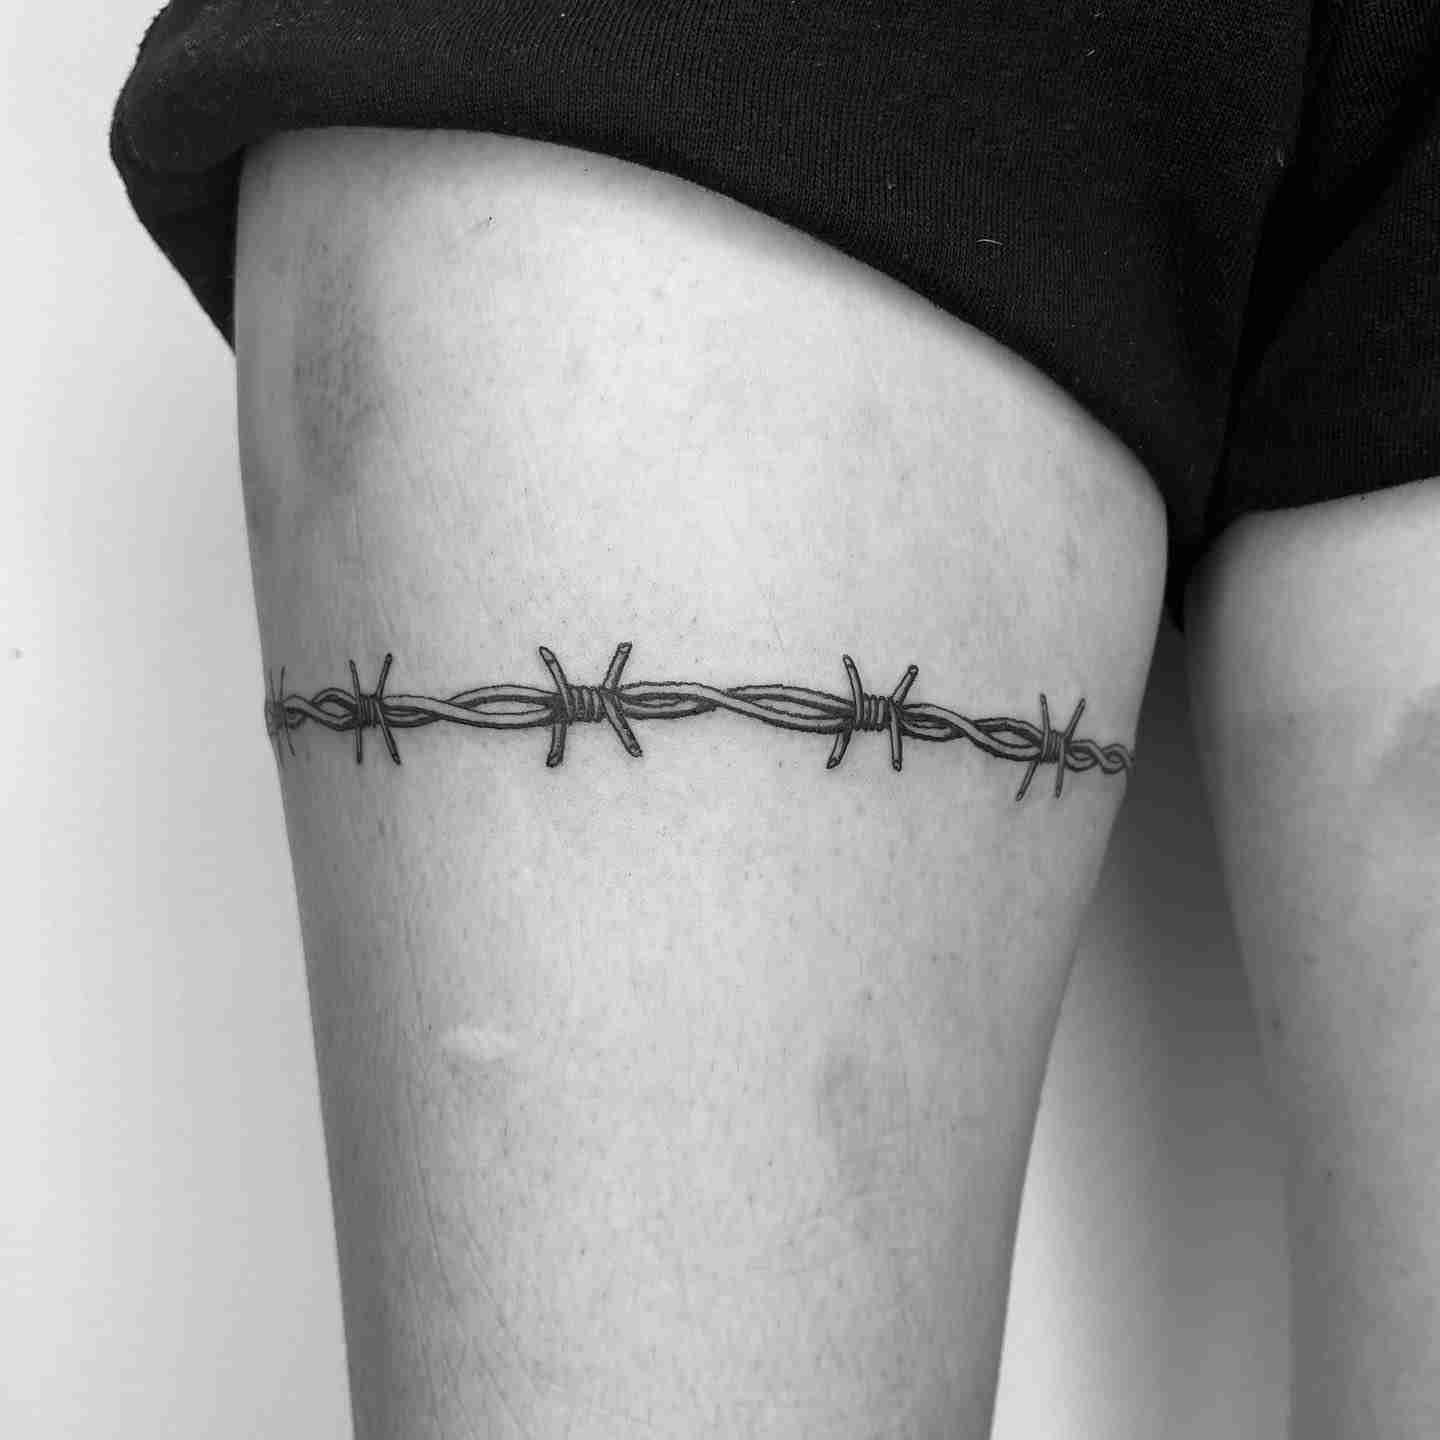 Barbed wire around arm tattoo meaning